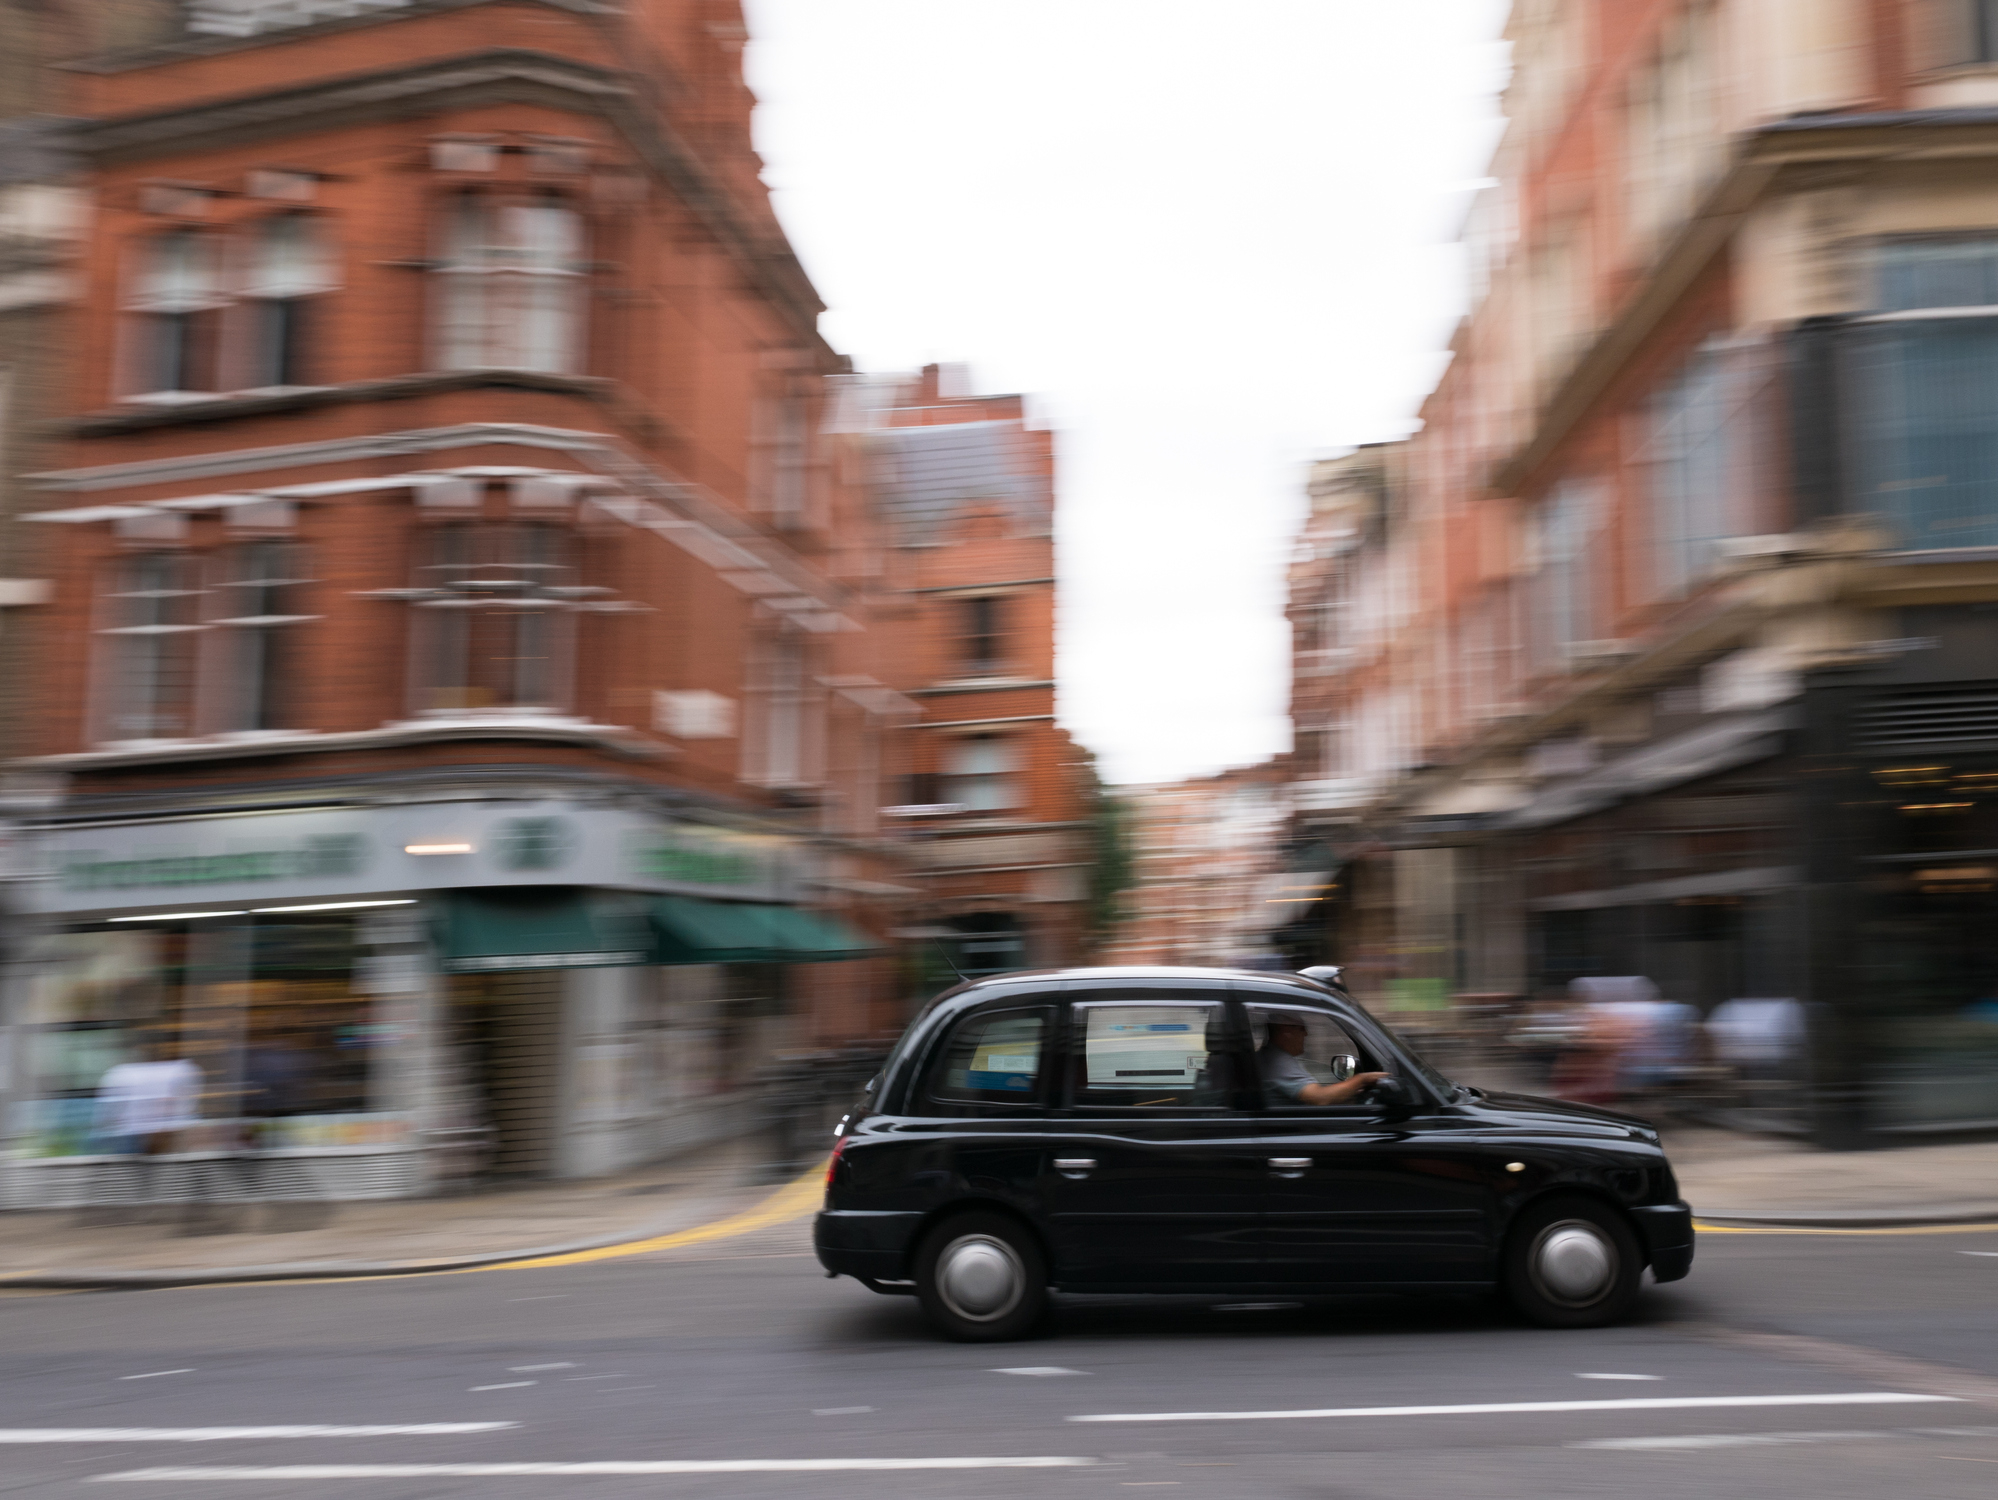 A black taxi cab flying through the streets of London.